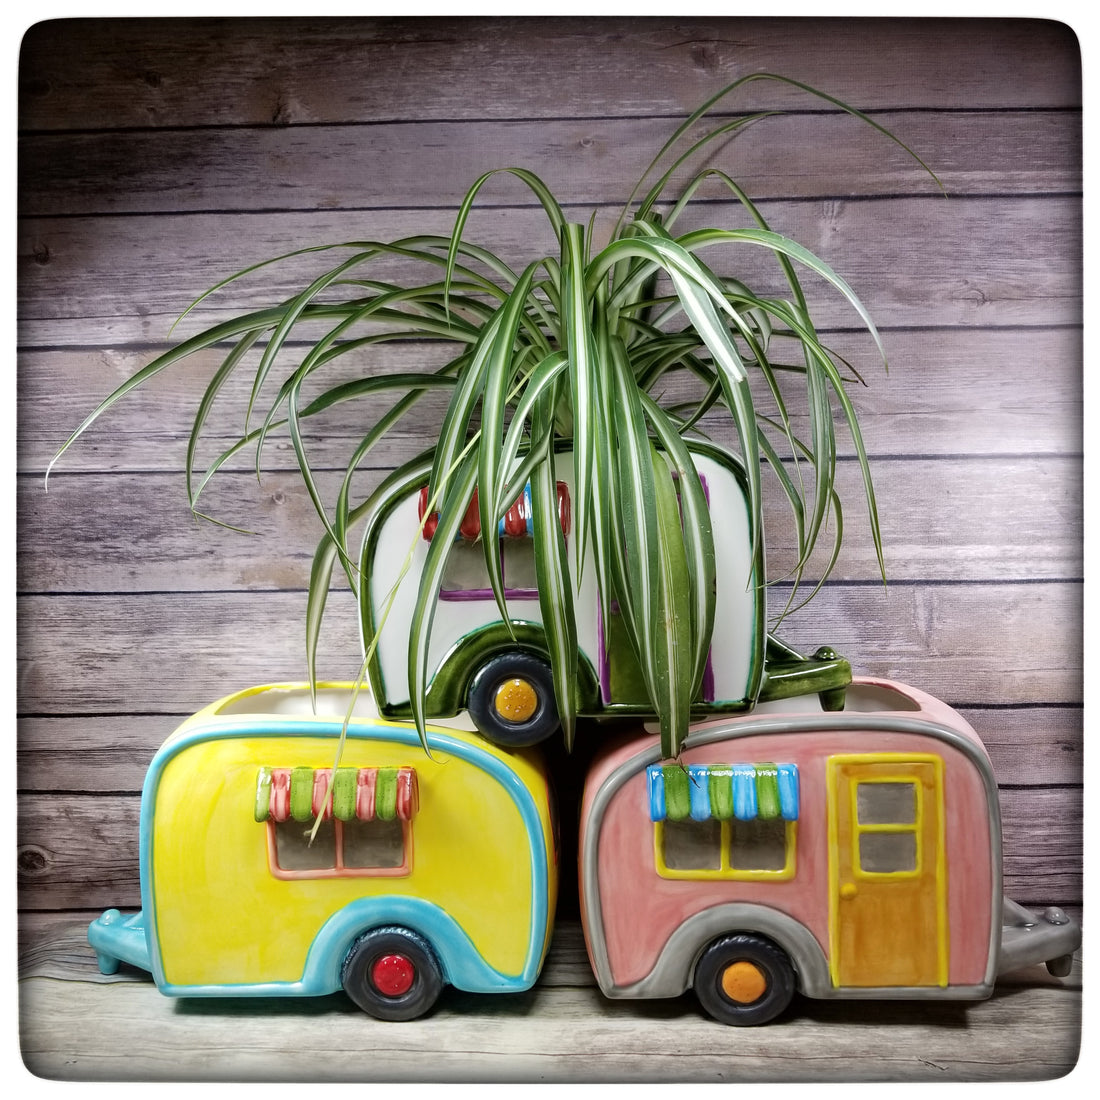 You *have* seen these new camper planters, right?